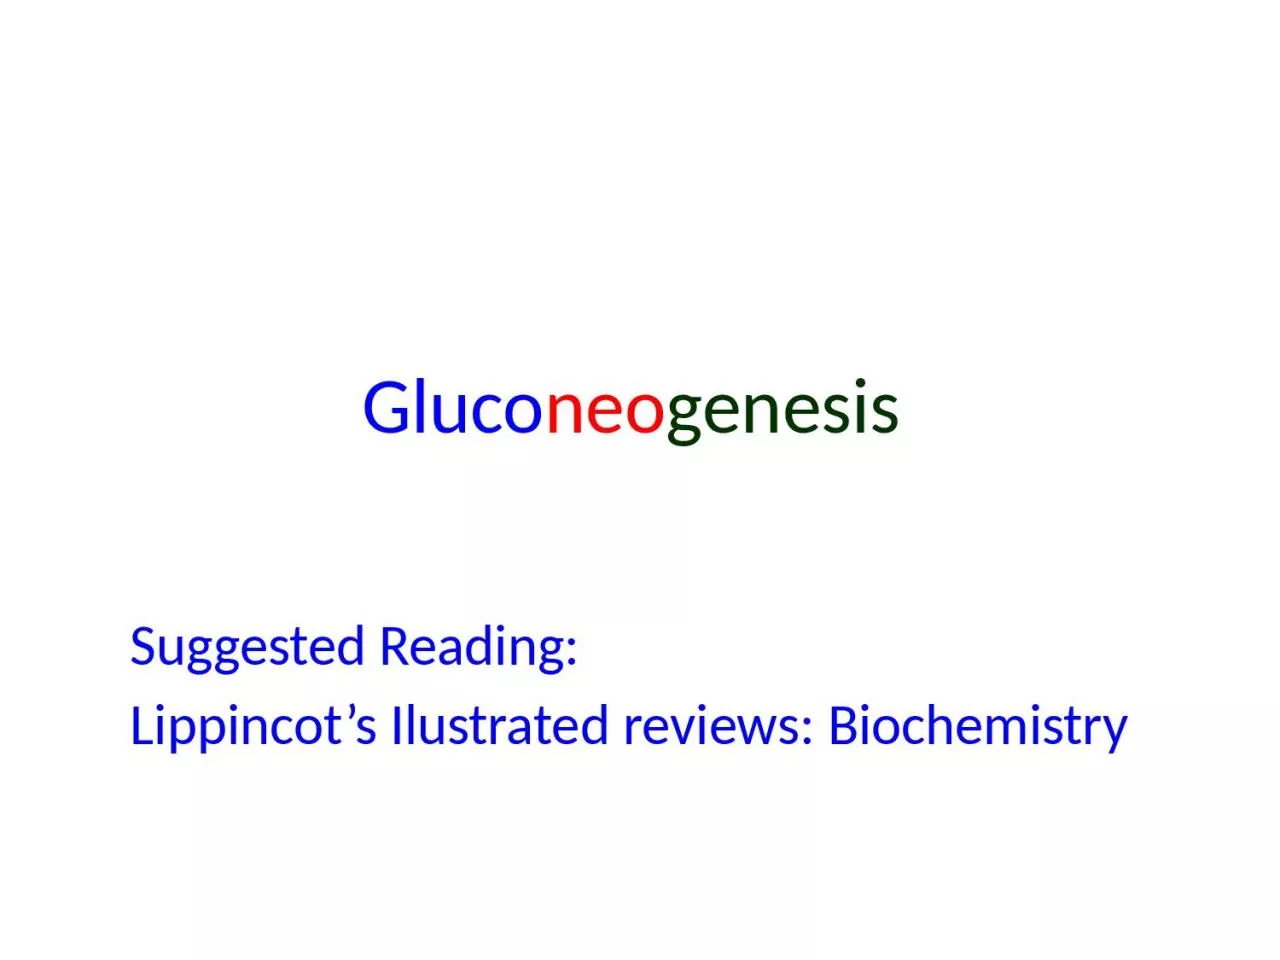 Gluco neo genesis   Suggested Reading: